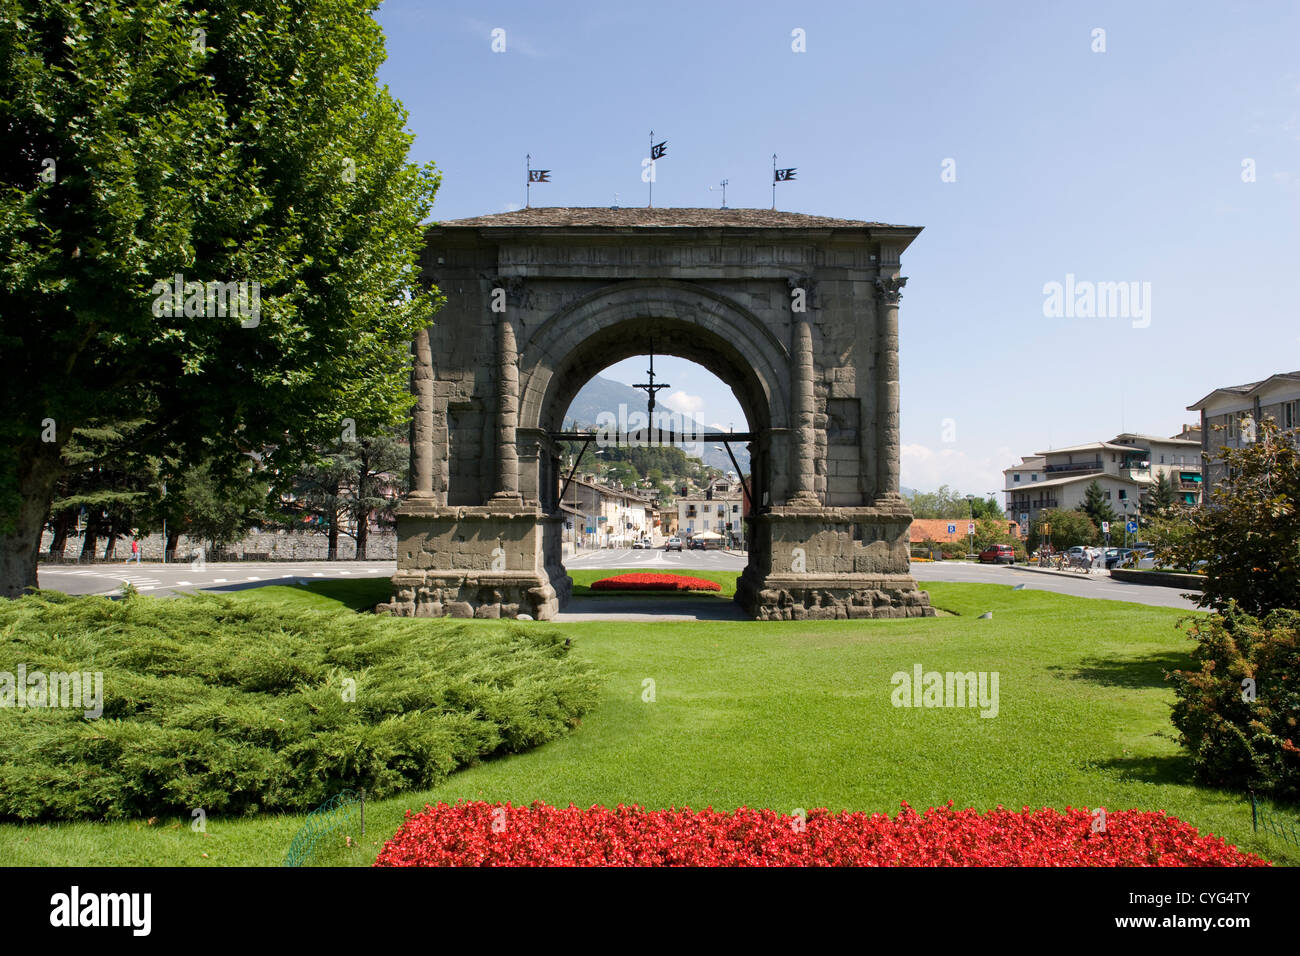 Aosta - Arch of Augustus in Piazza Arco d'Augusto Stock Photo